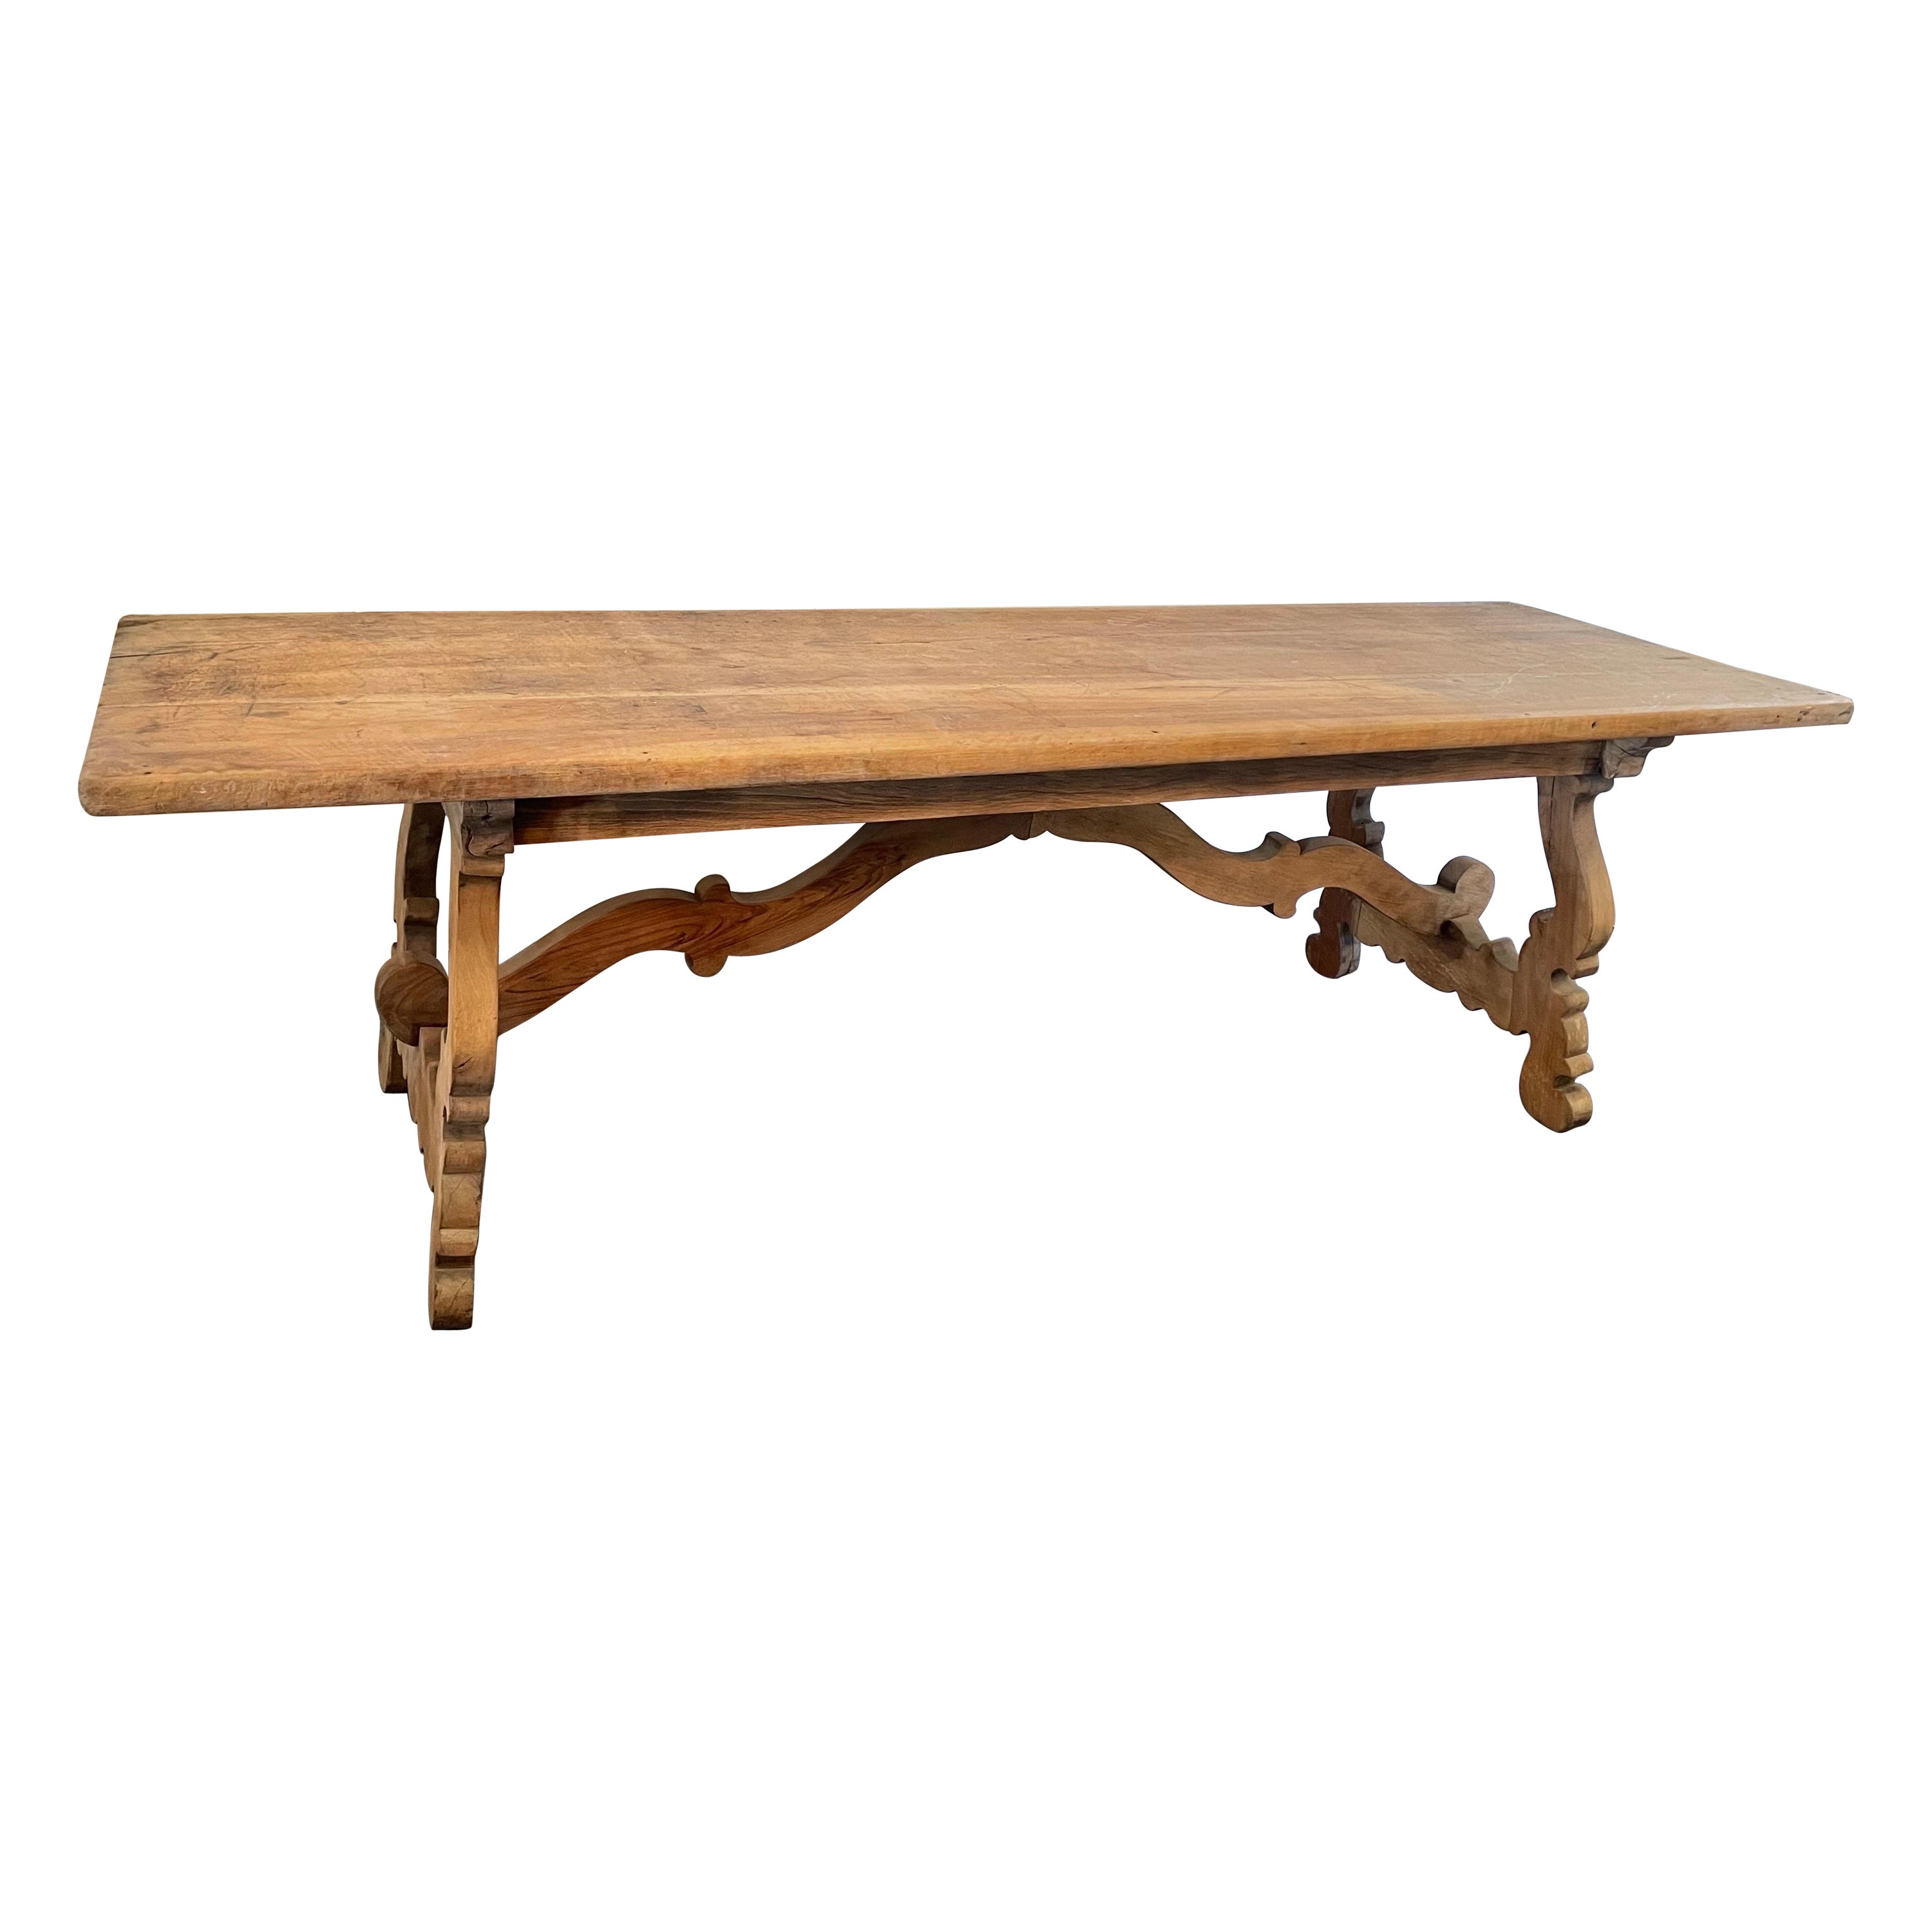 Italian 18th And 19th Century Tuscan Walnut Dining Table